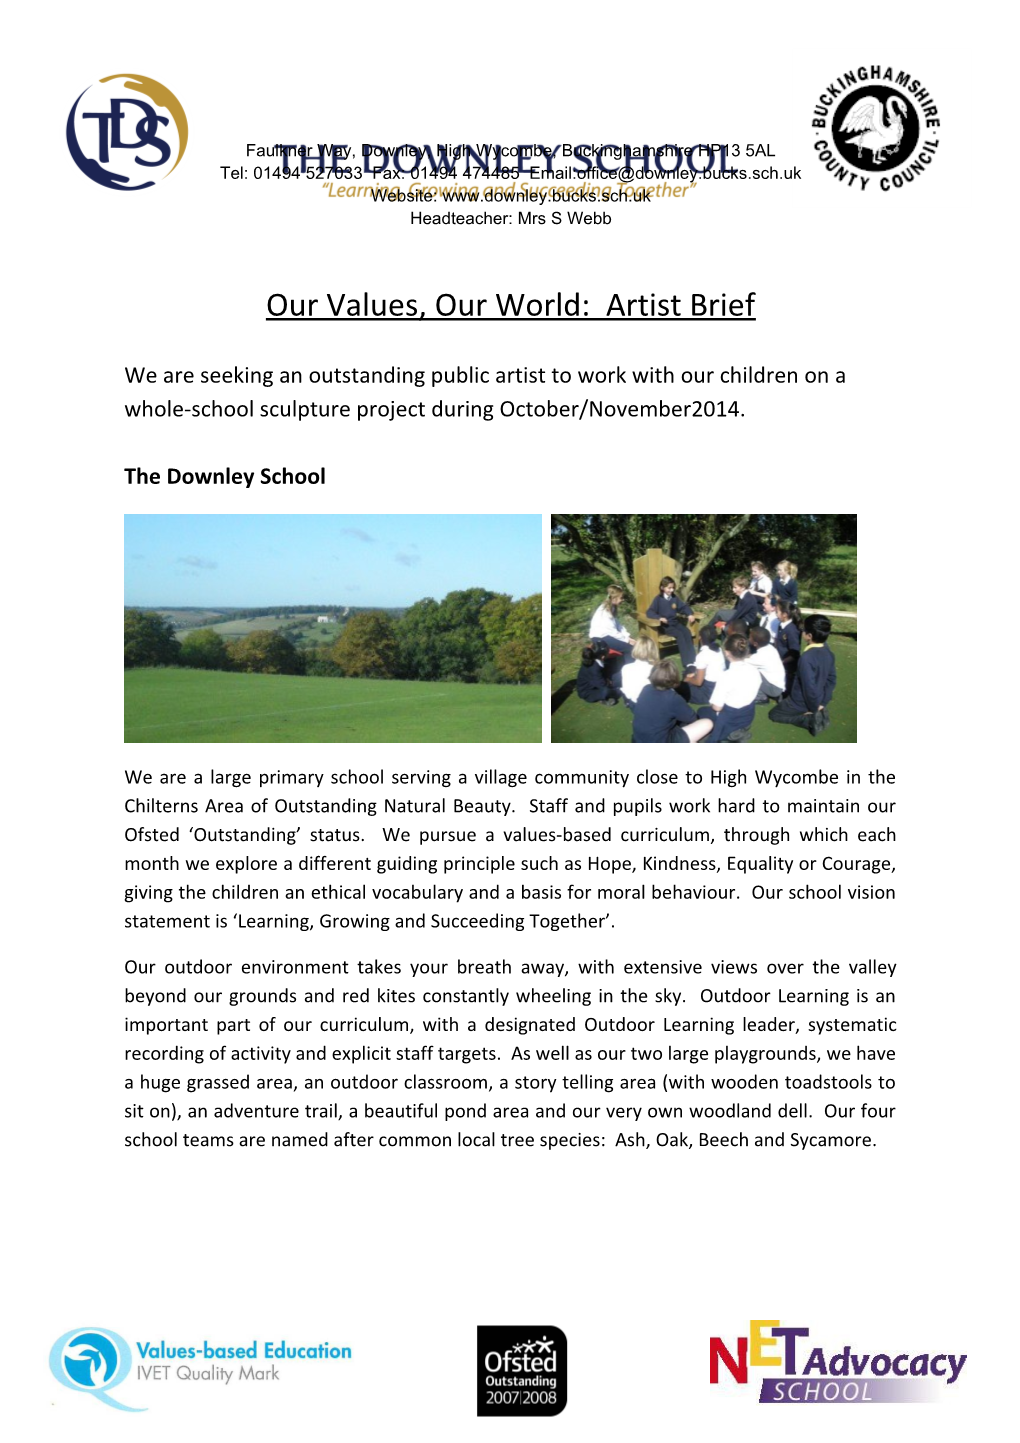 Our Values, Our World: Artist Brief